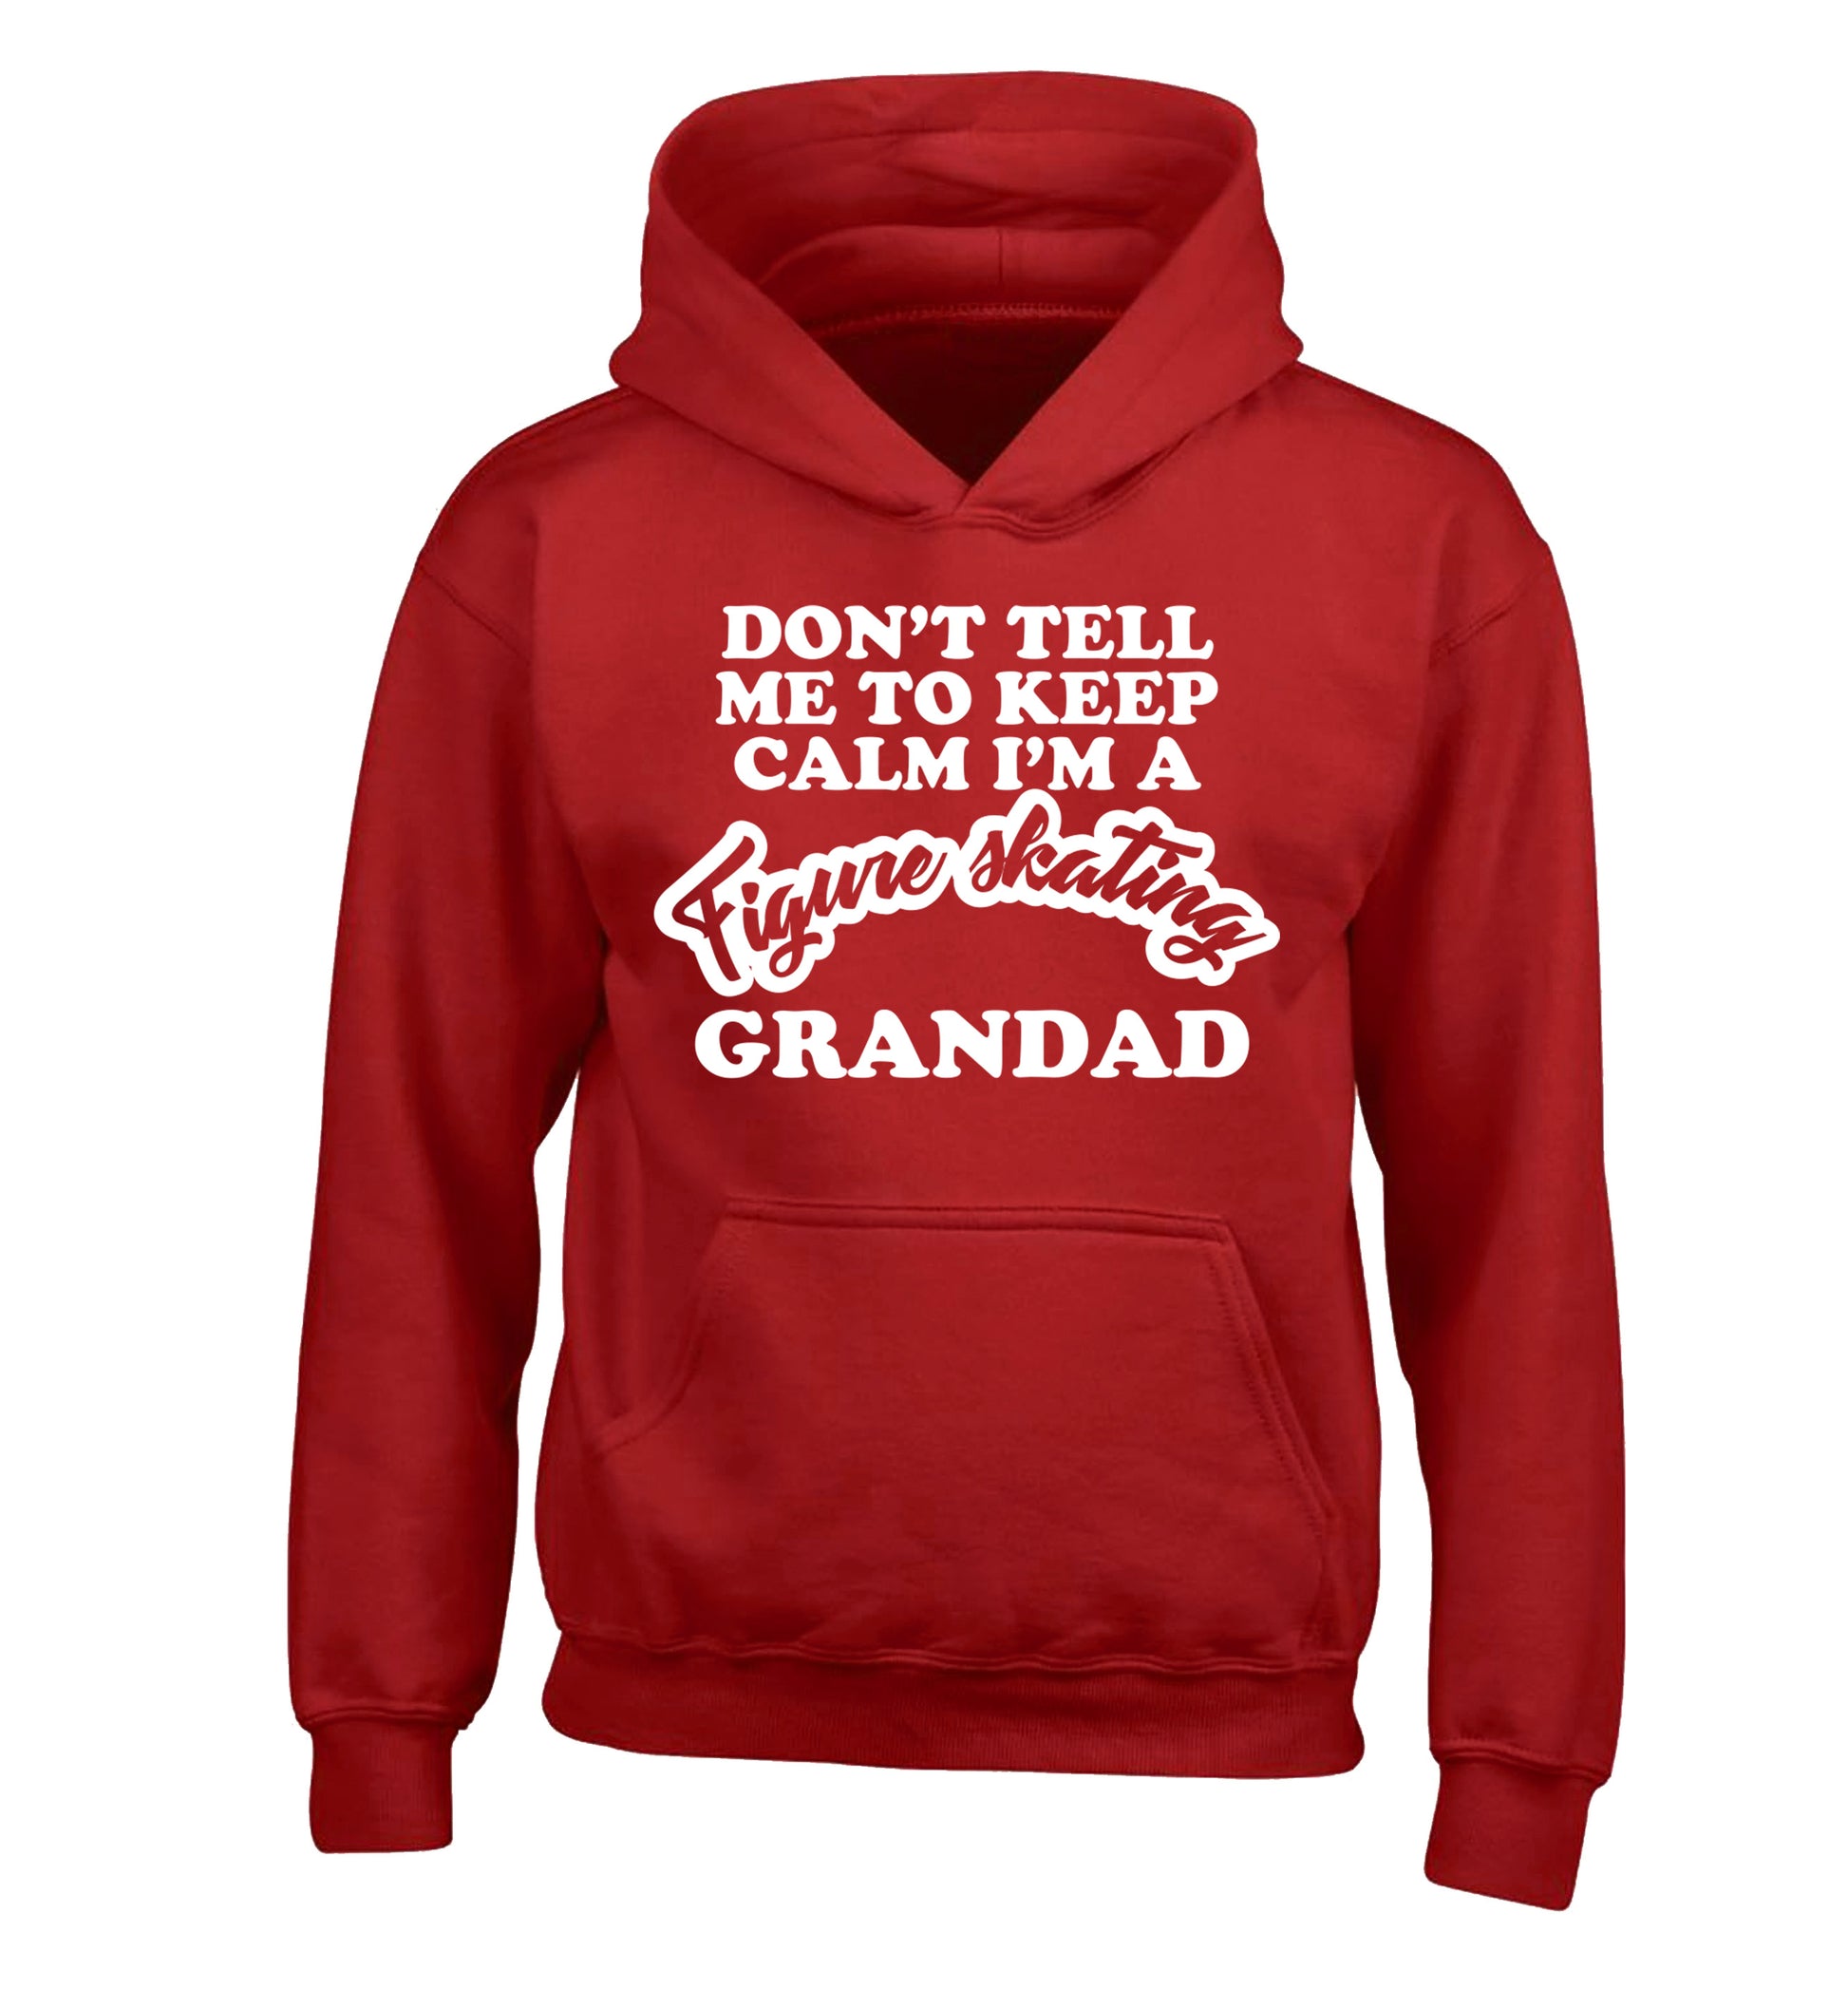 Don't tell me to keep calm I'm a figure skating grandad children's red hoodie 12-14 Years